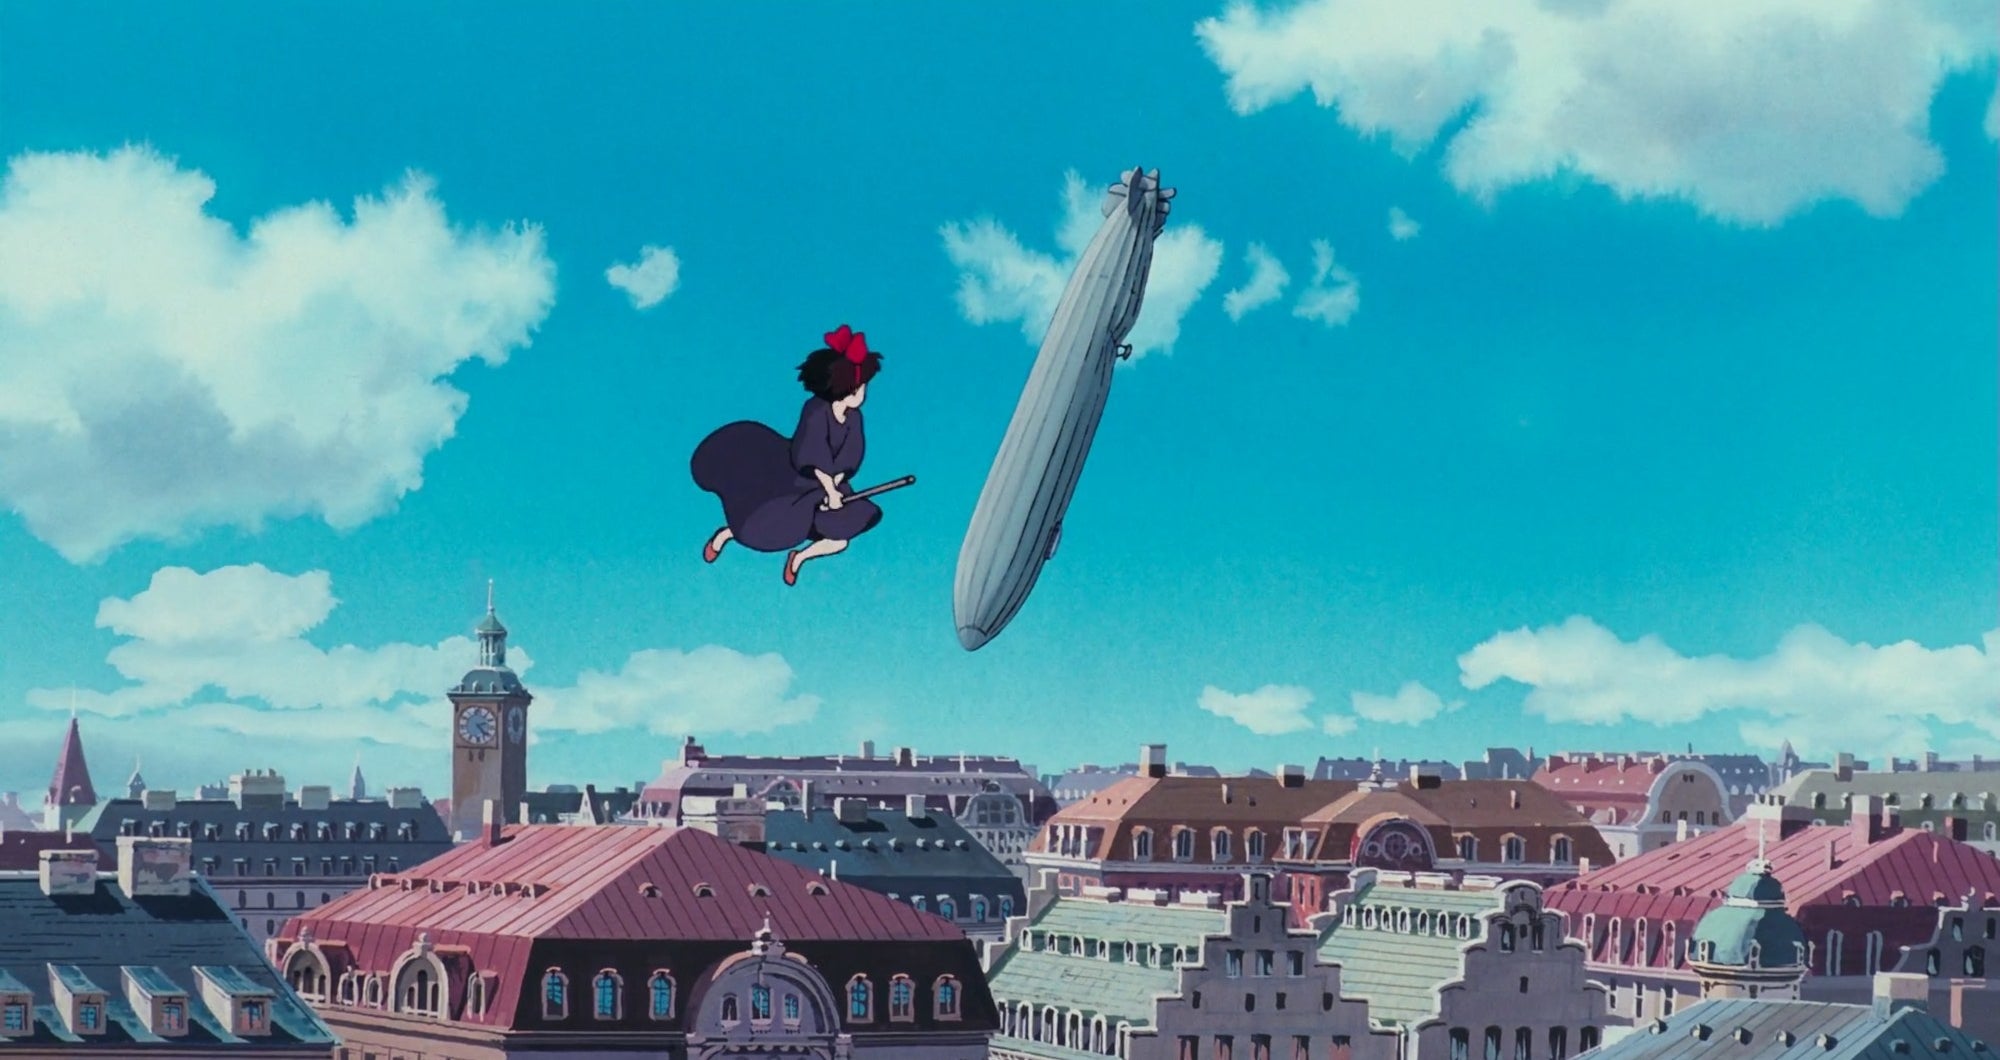 A young girl on a broomstick hovers above a city with a blimp falling from the sky in the background